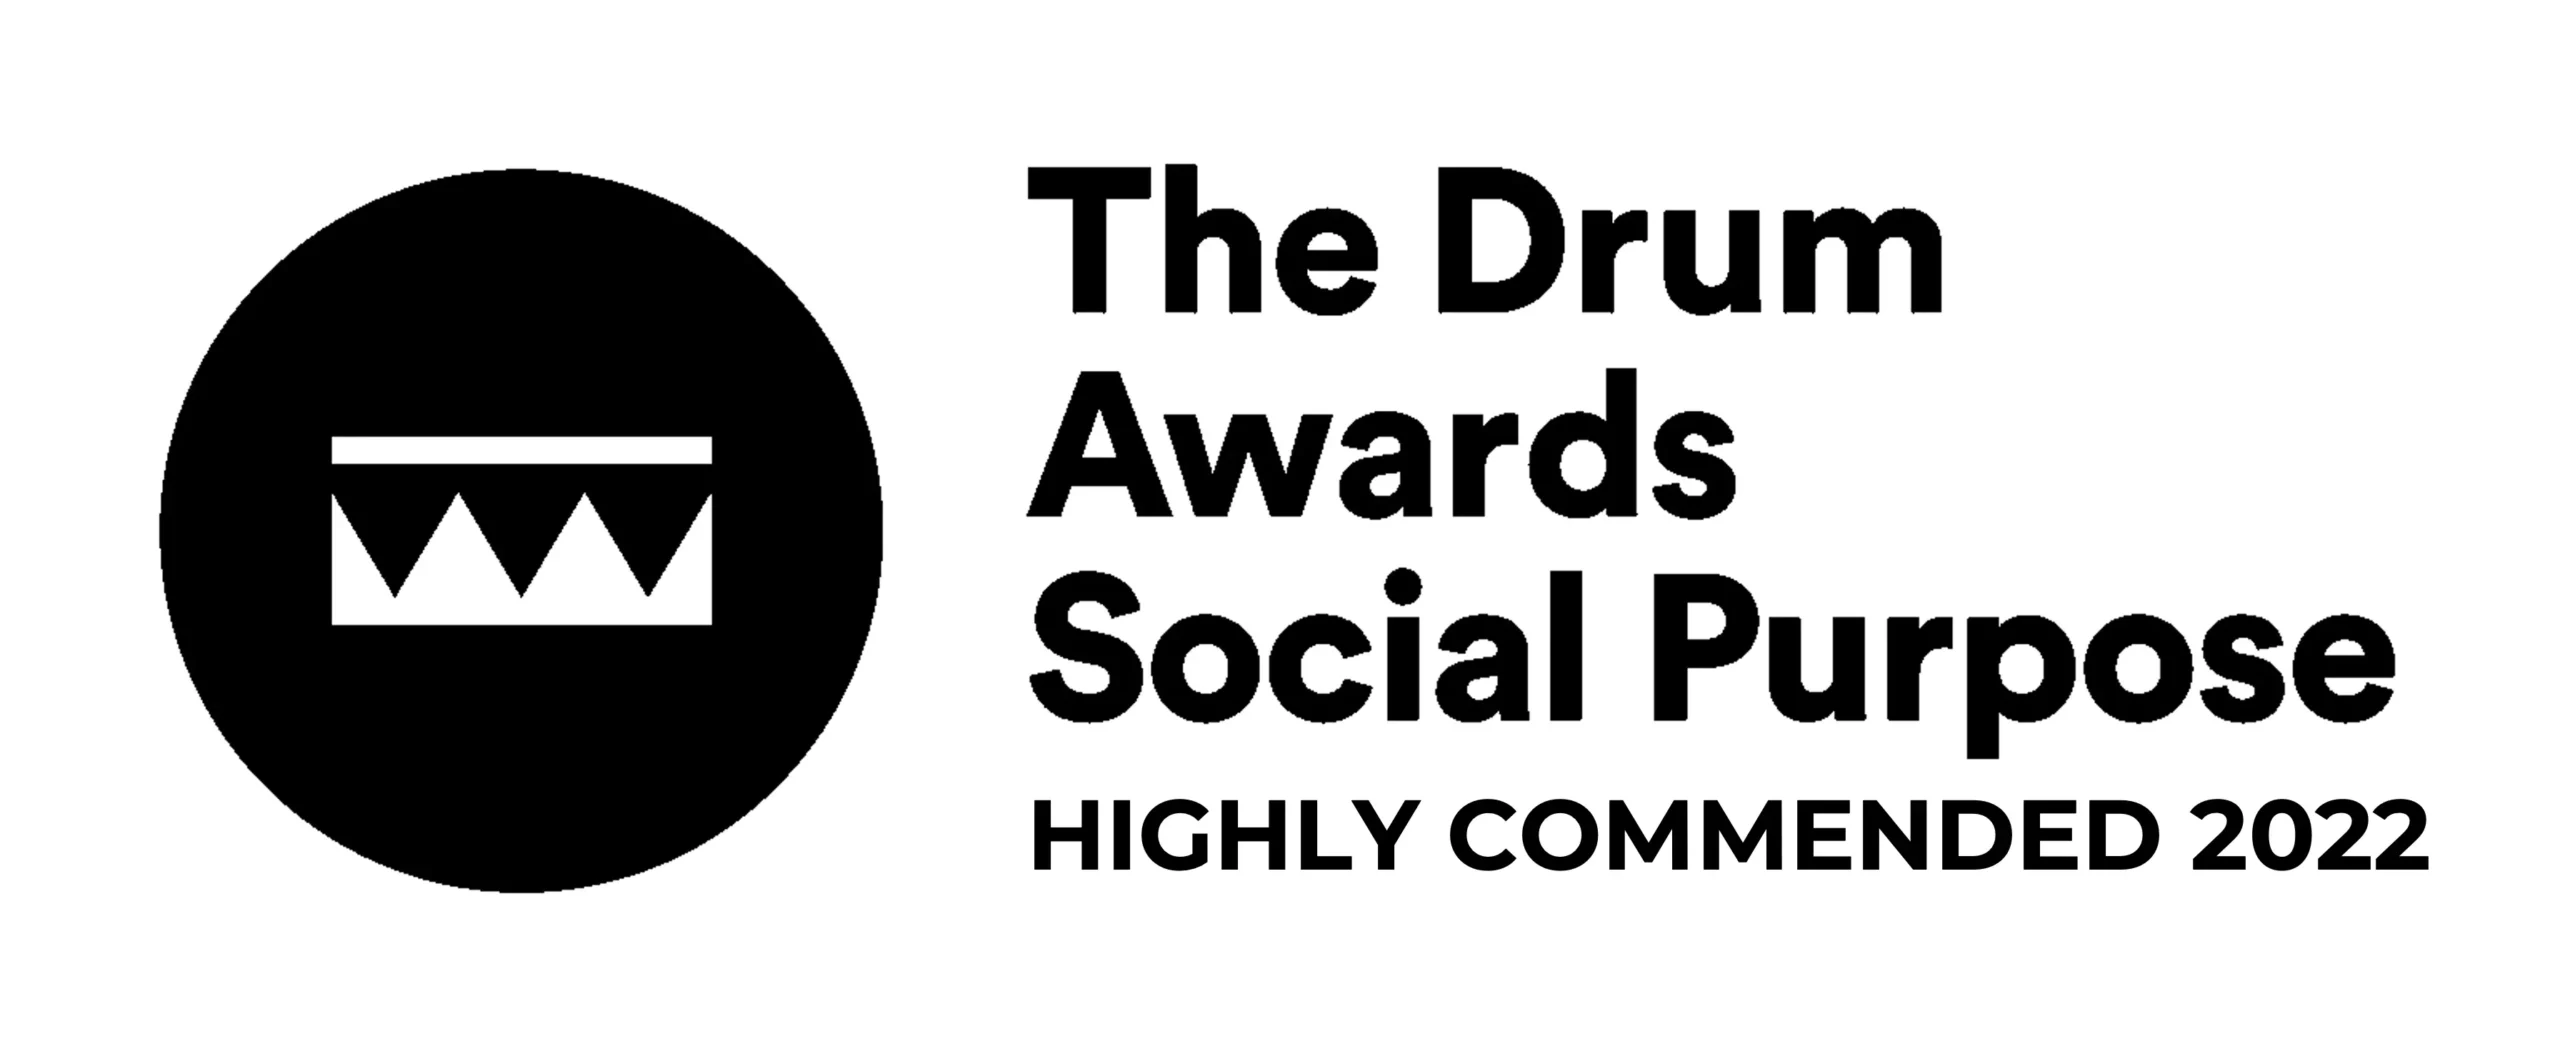 The Drum Awards for Social Purpose Highly Commended 2022.